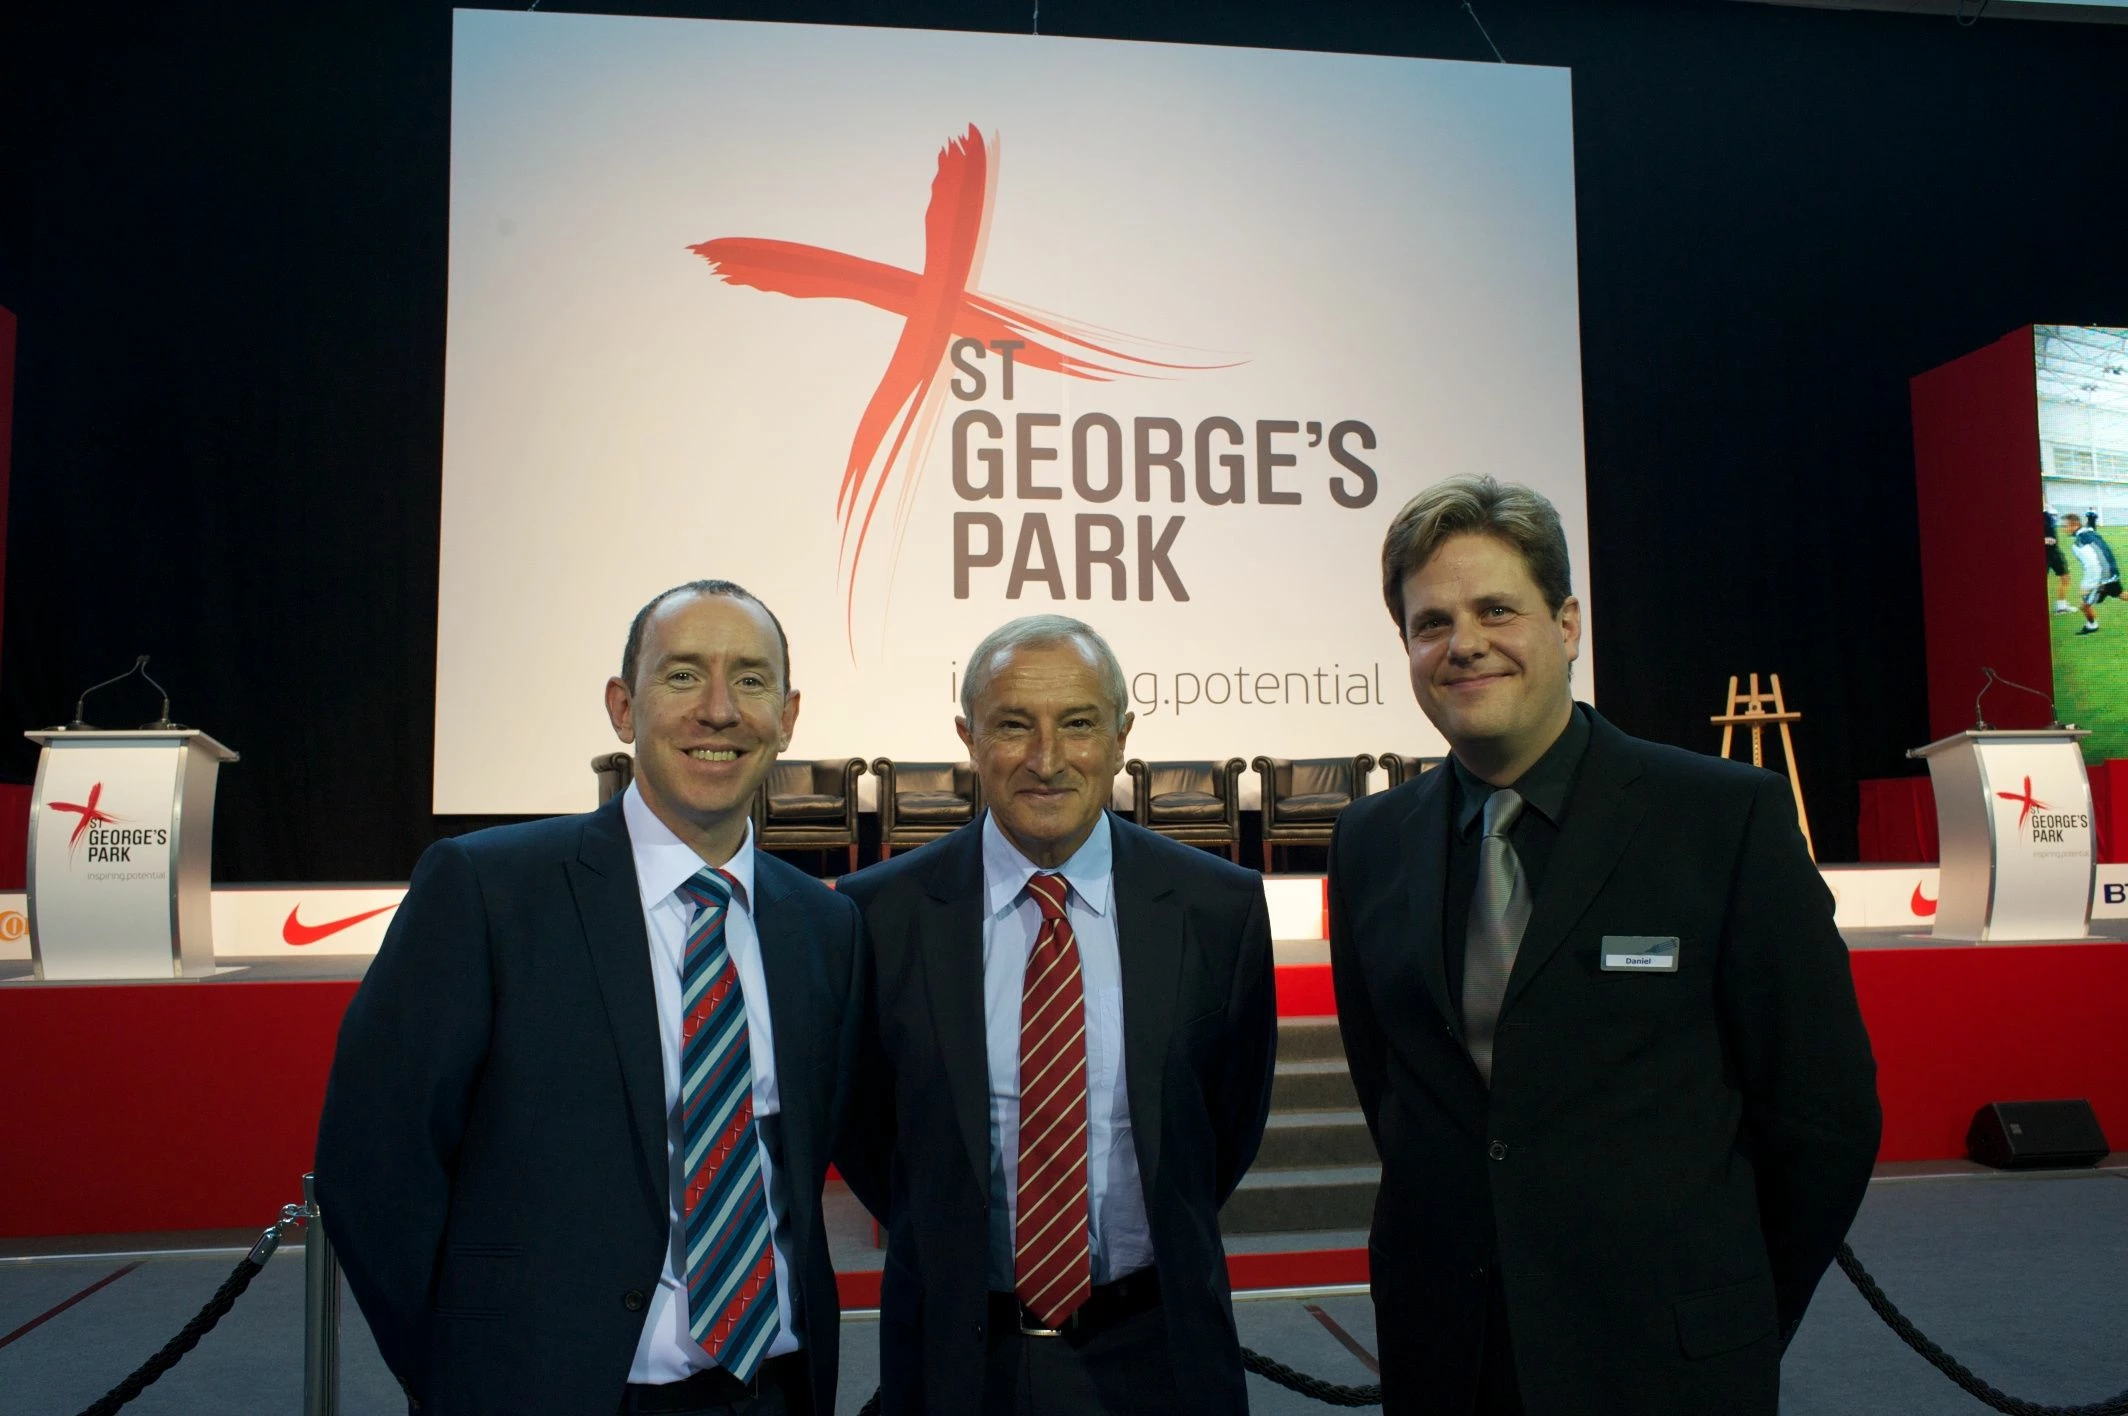 Managing Director of Dine, Daniel Gill with Jim Rosenthal and Matt Hudson from Generate Events